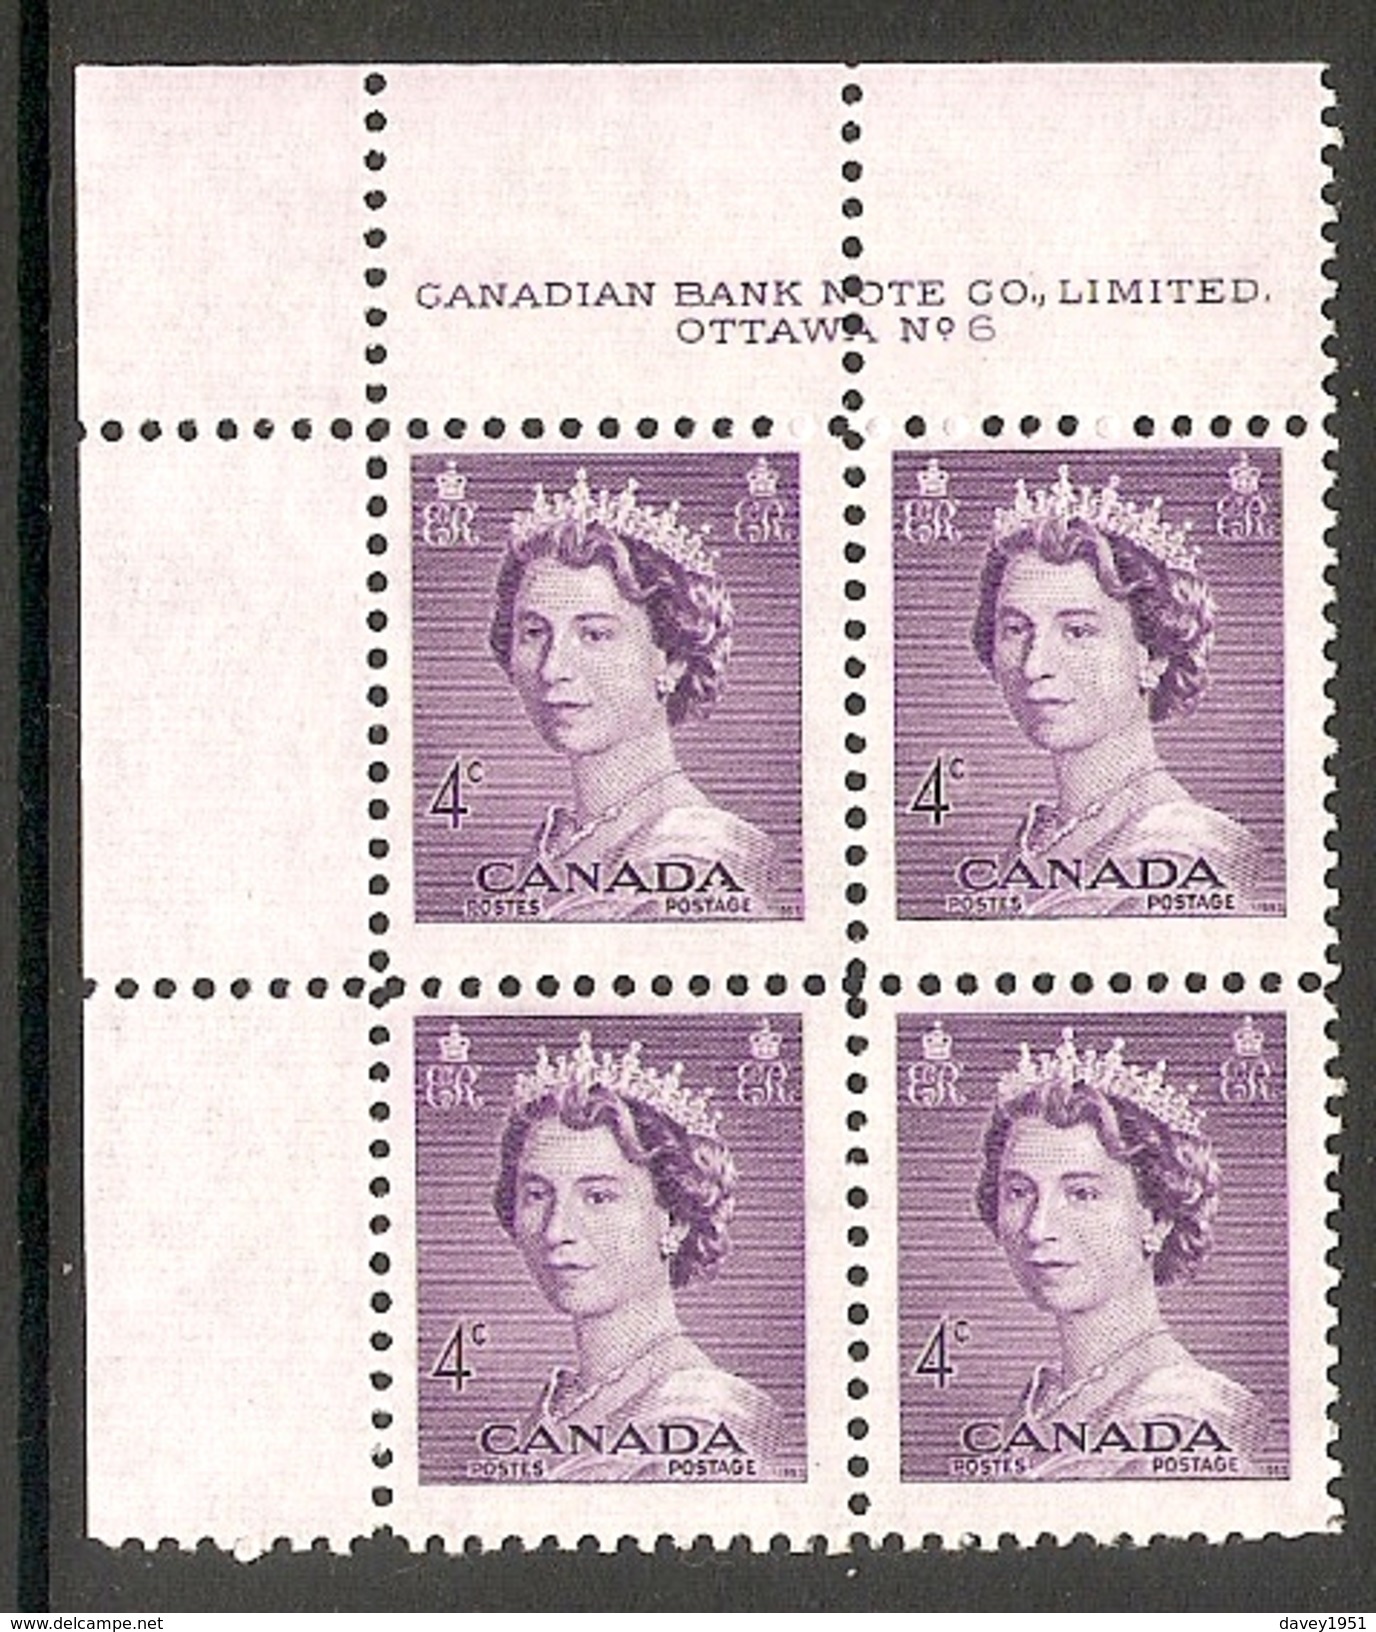 003600 Canada 1953 4c MNH Plate 6 Block UL - Plate Number & Inscriptions